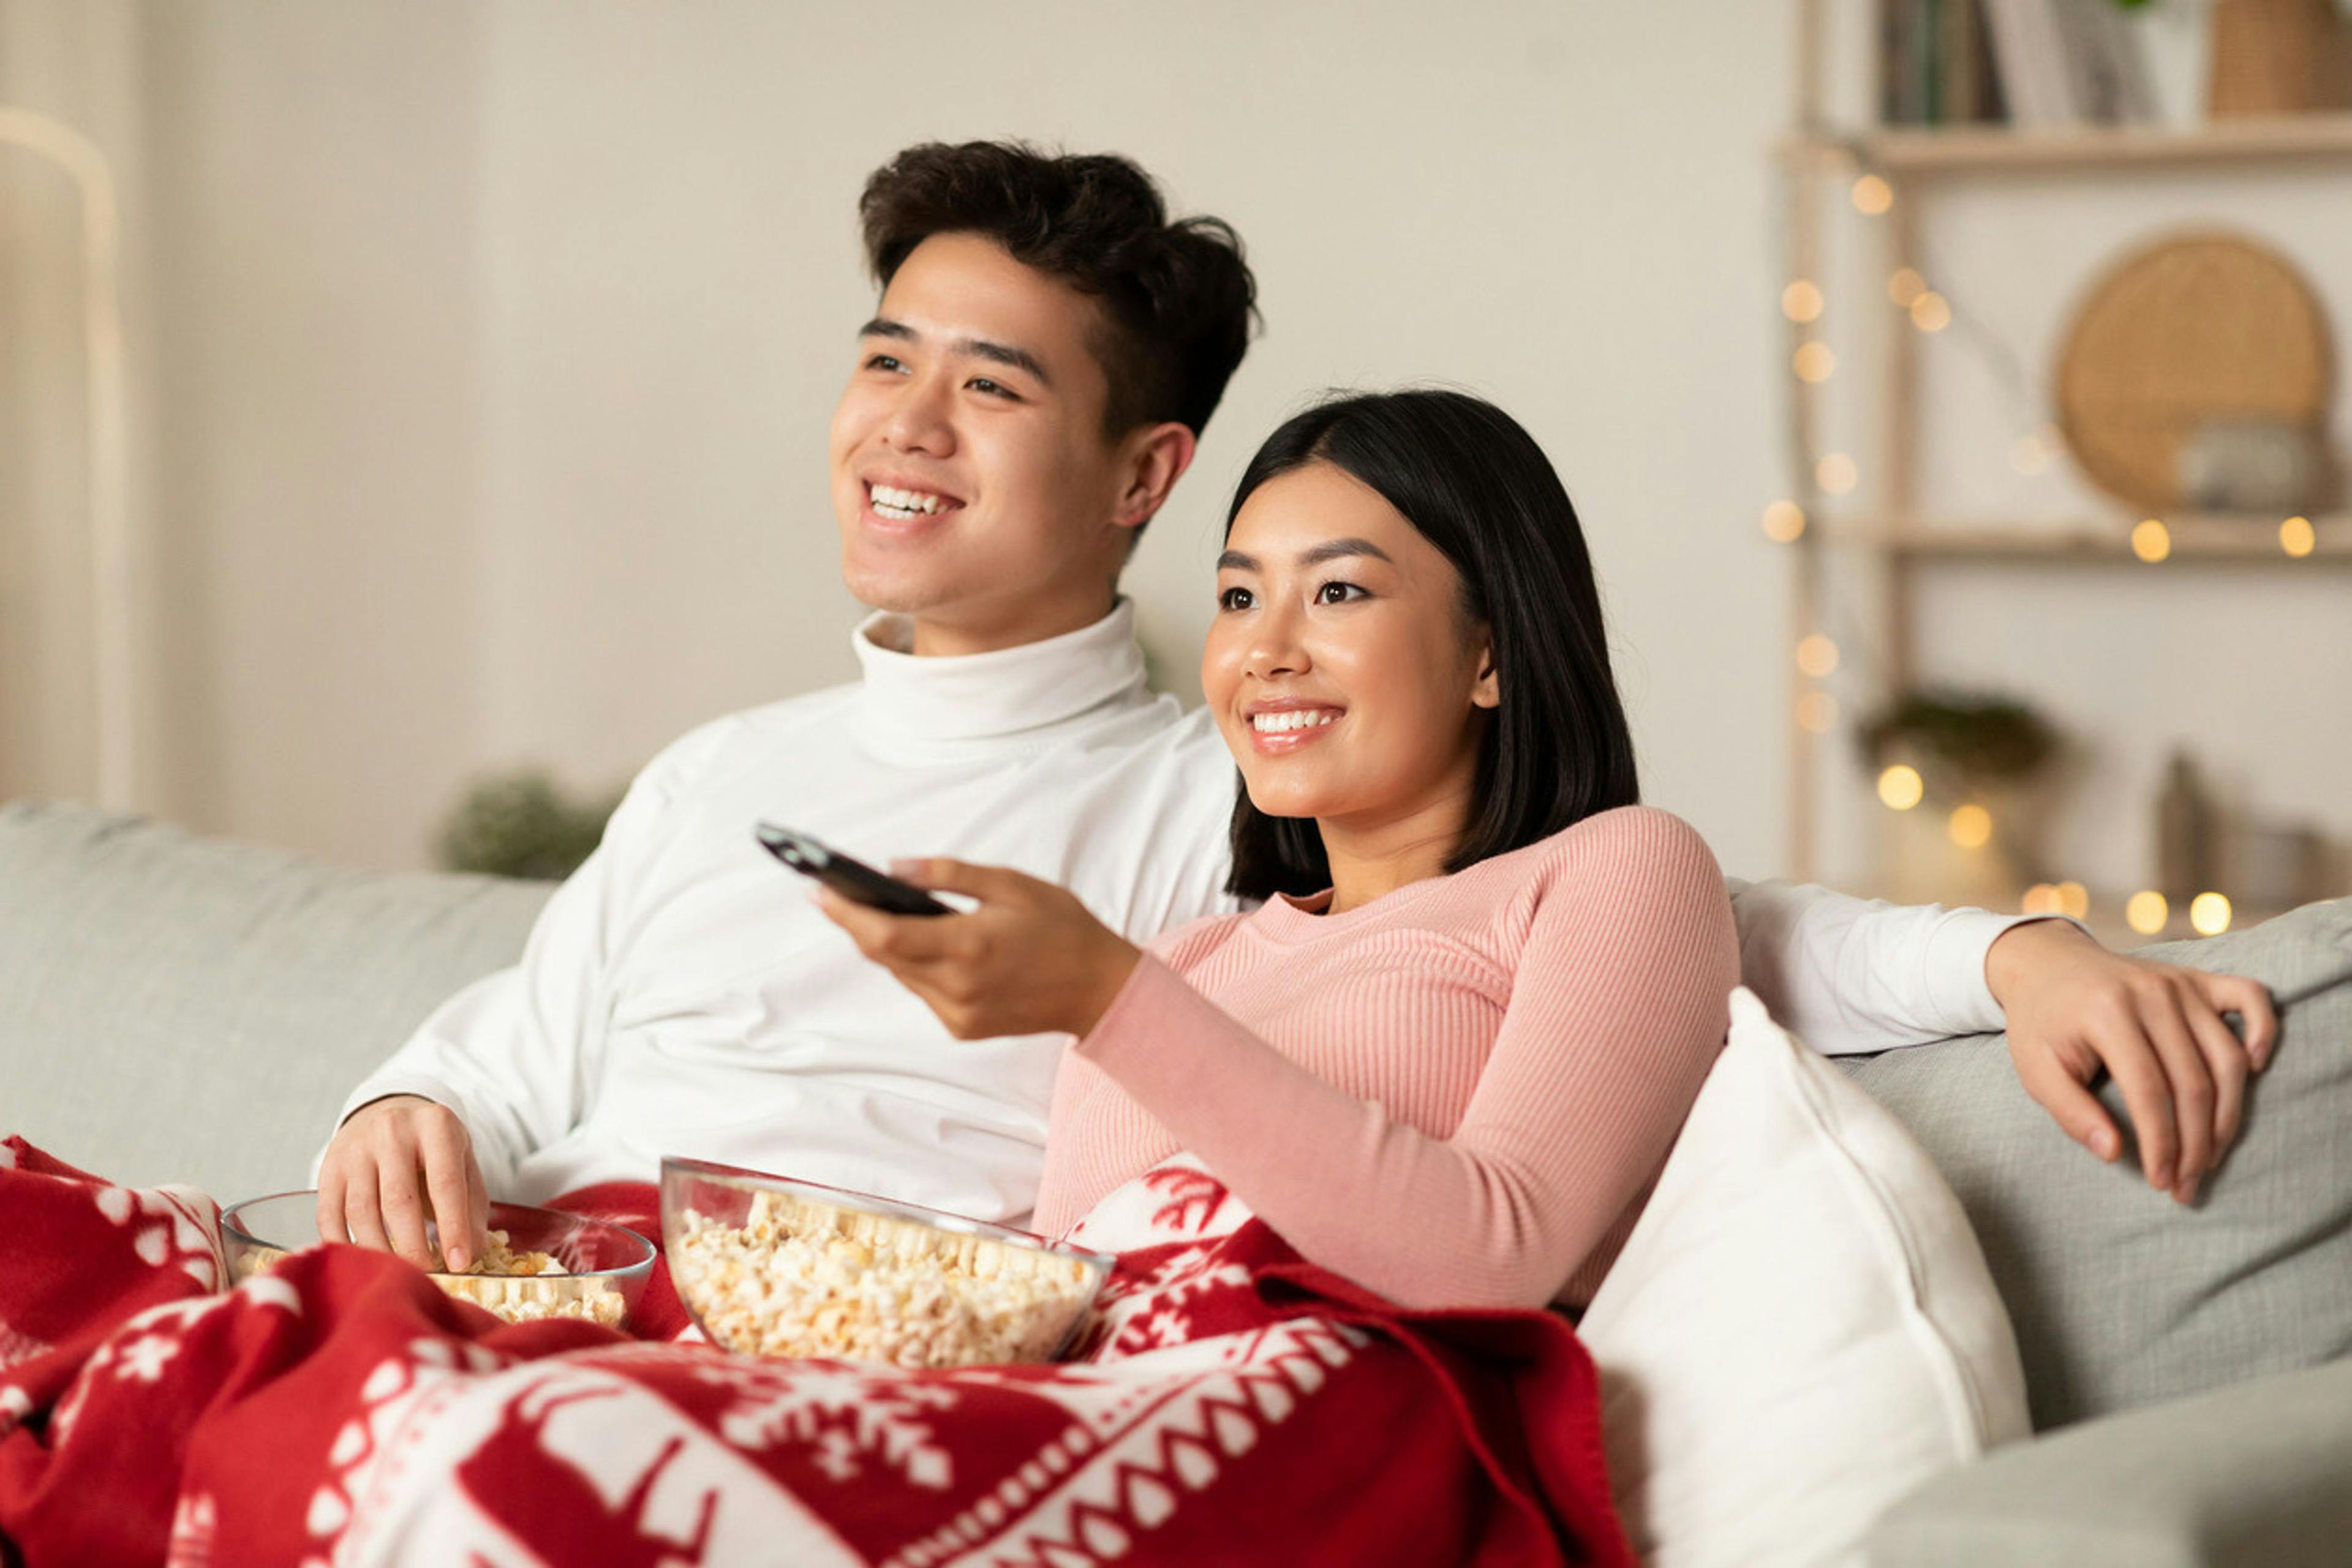 How a Leading Cable Network Drove Tune-In For Their Holiday Movies With Simulmedia's TV+